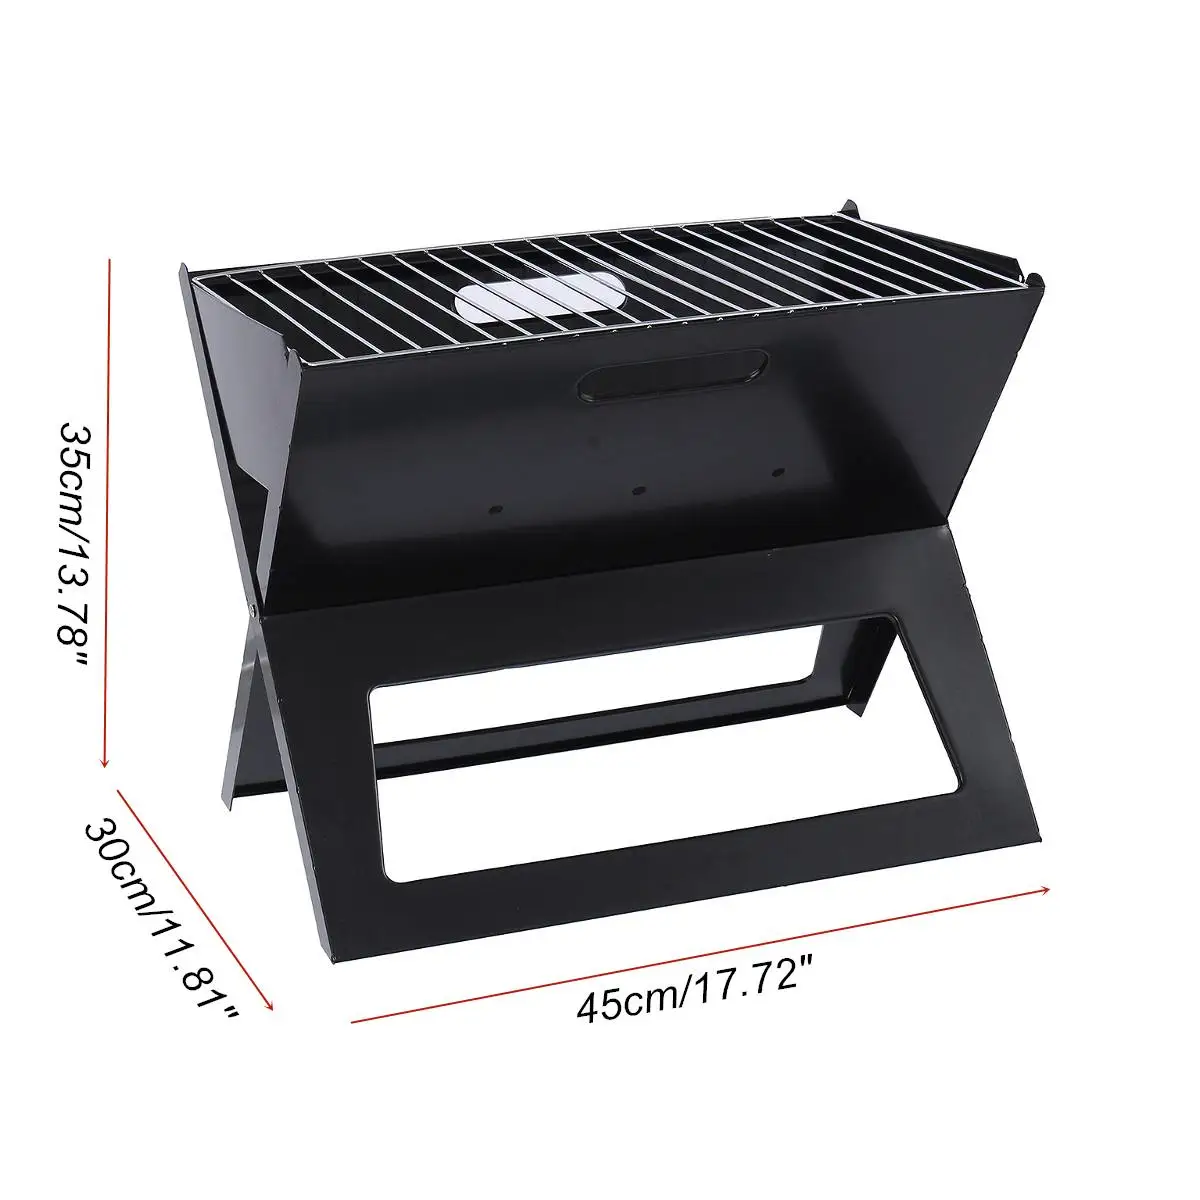 

3-5 People Outdoor BBQ Grill Portable Folding Barbecue Charcoal Grills Cooking Stove Camping Picnic Tools Cookware